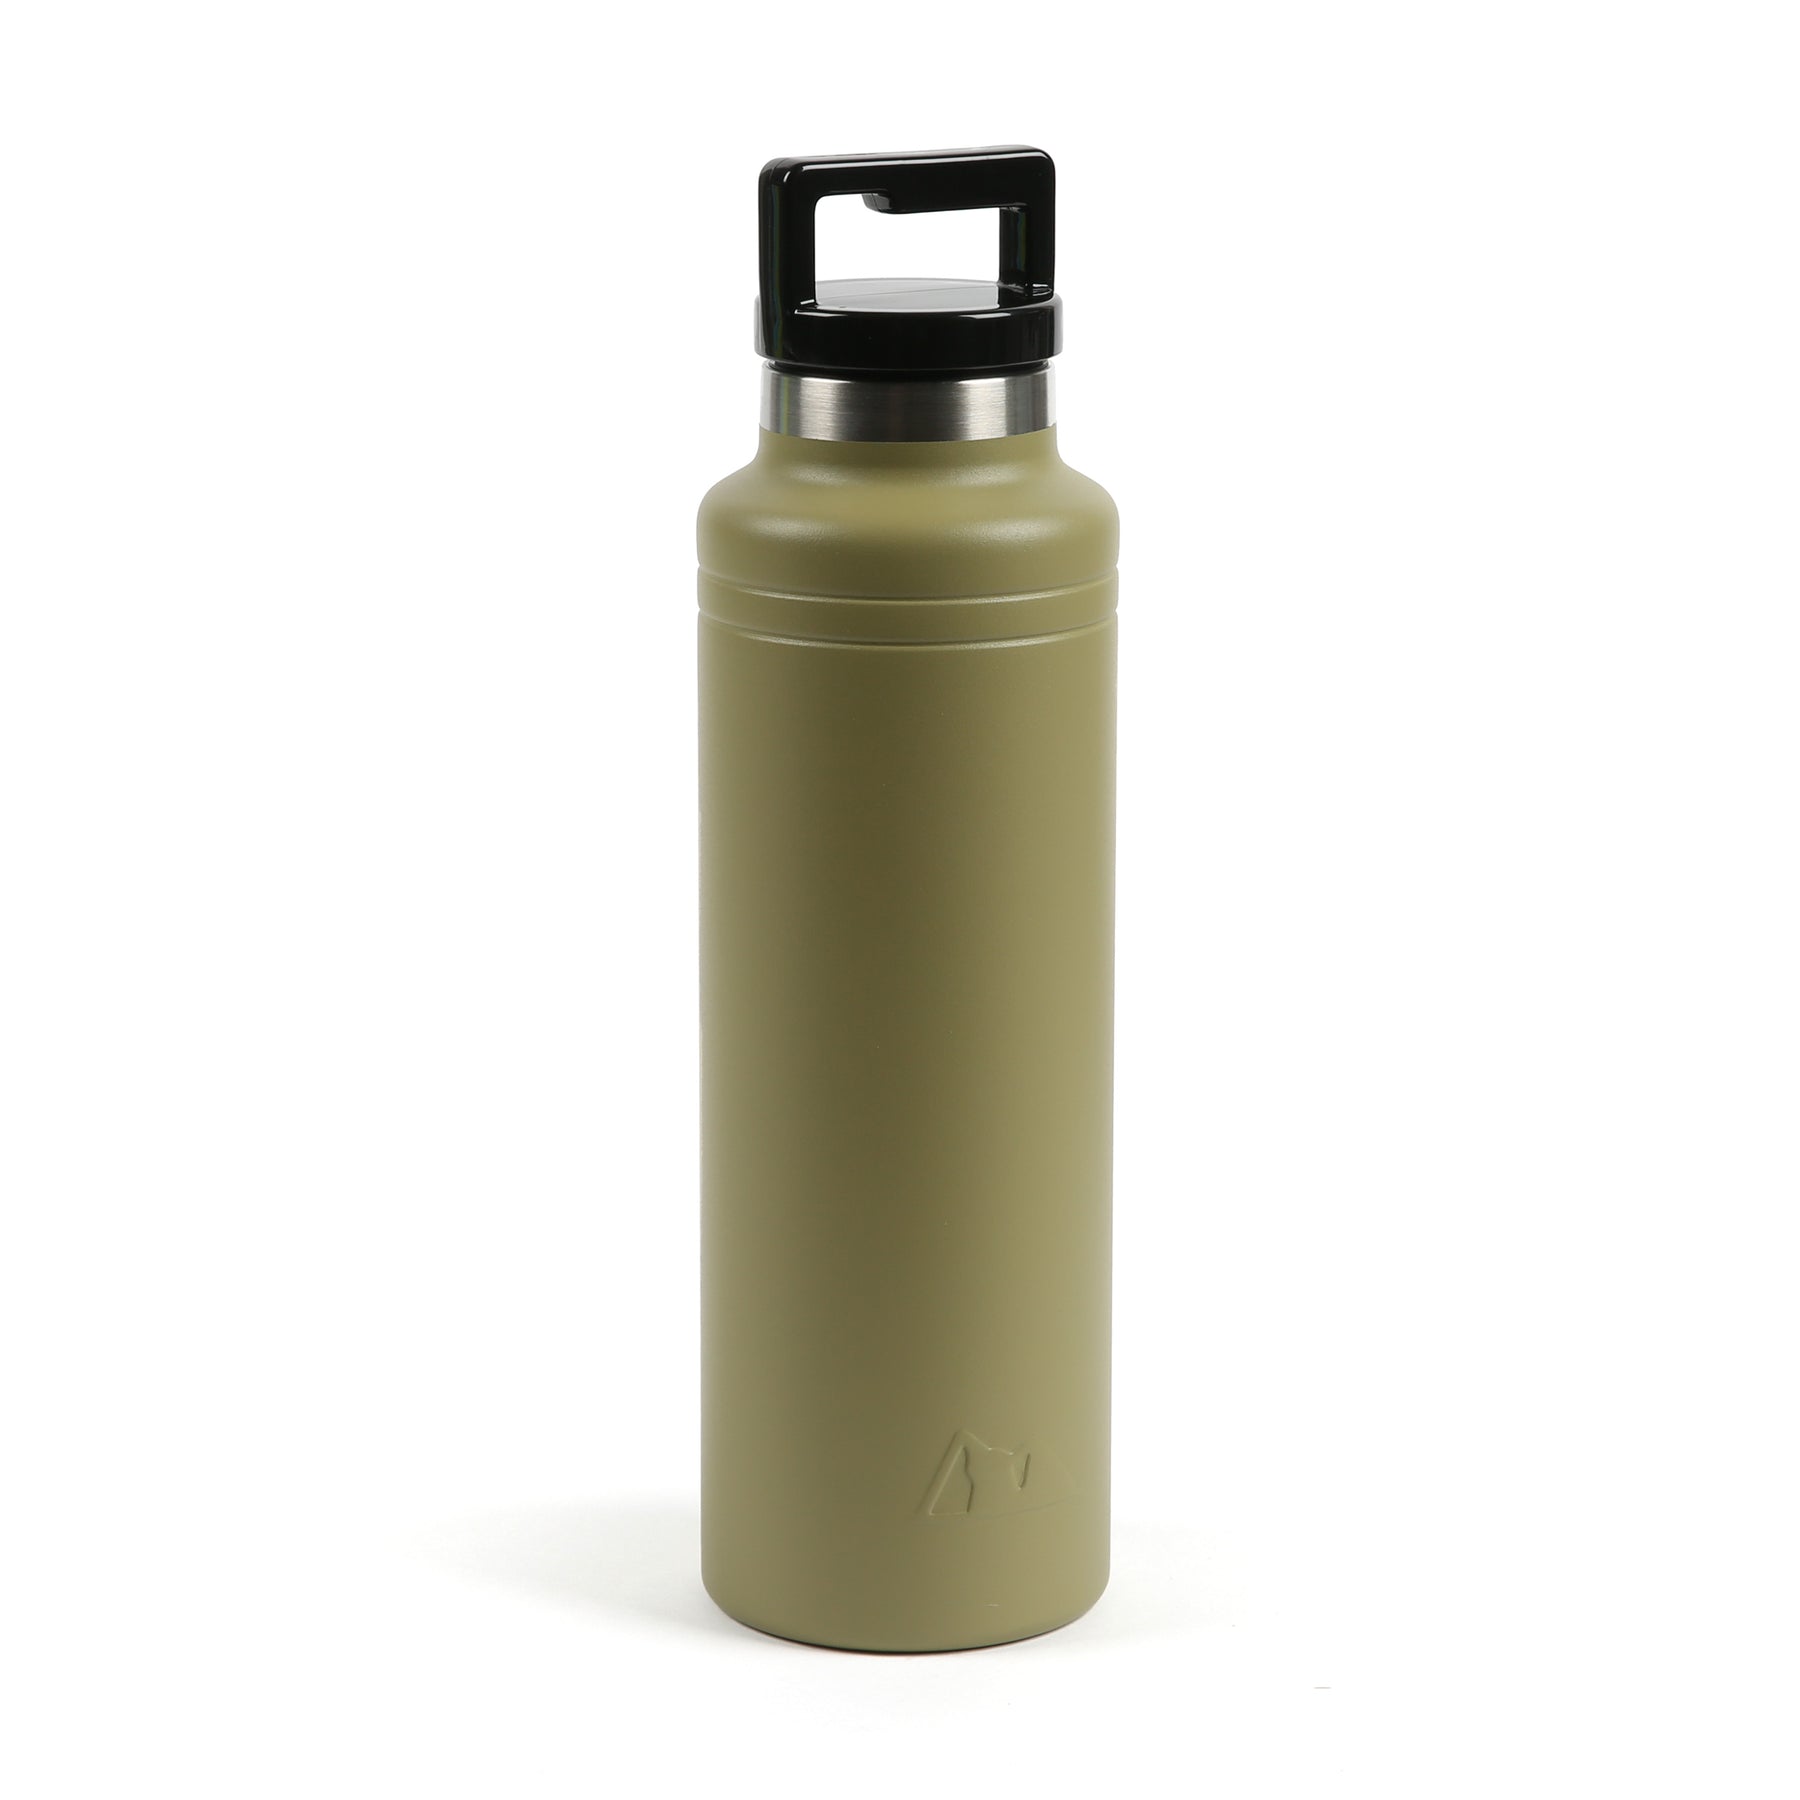 Stainless Steel Water Bottle 20oz light Weight GO Green Eco Friendly